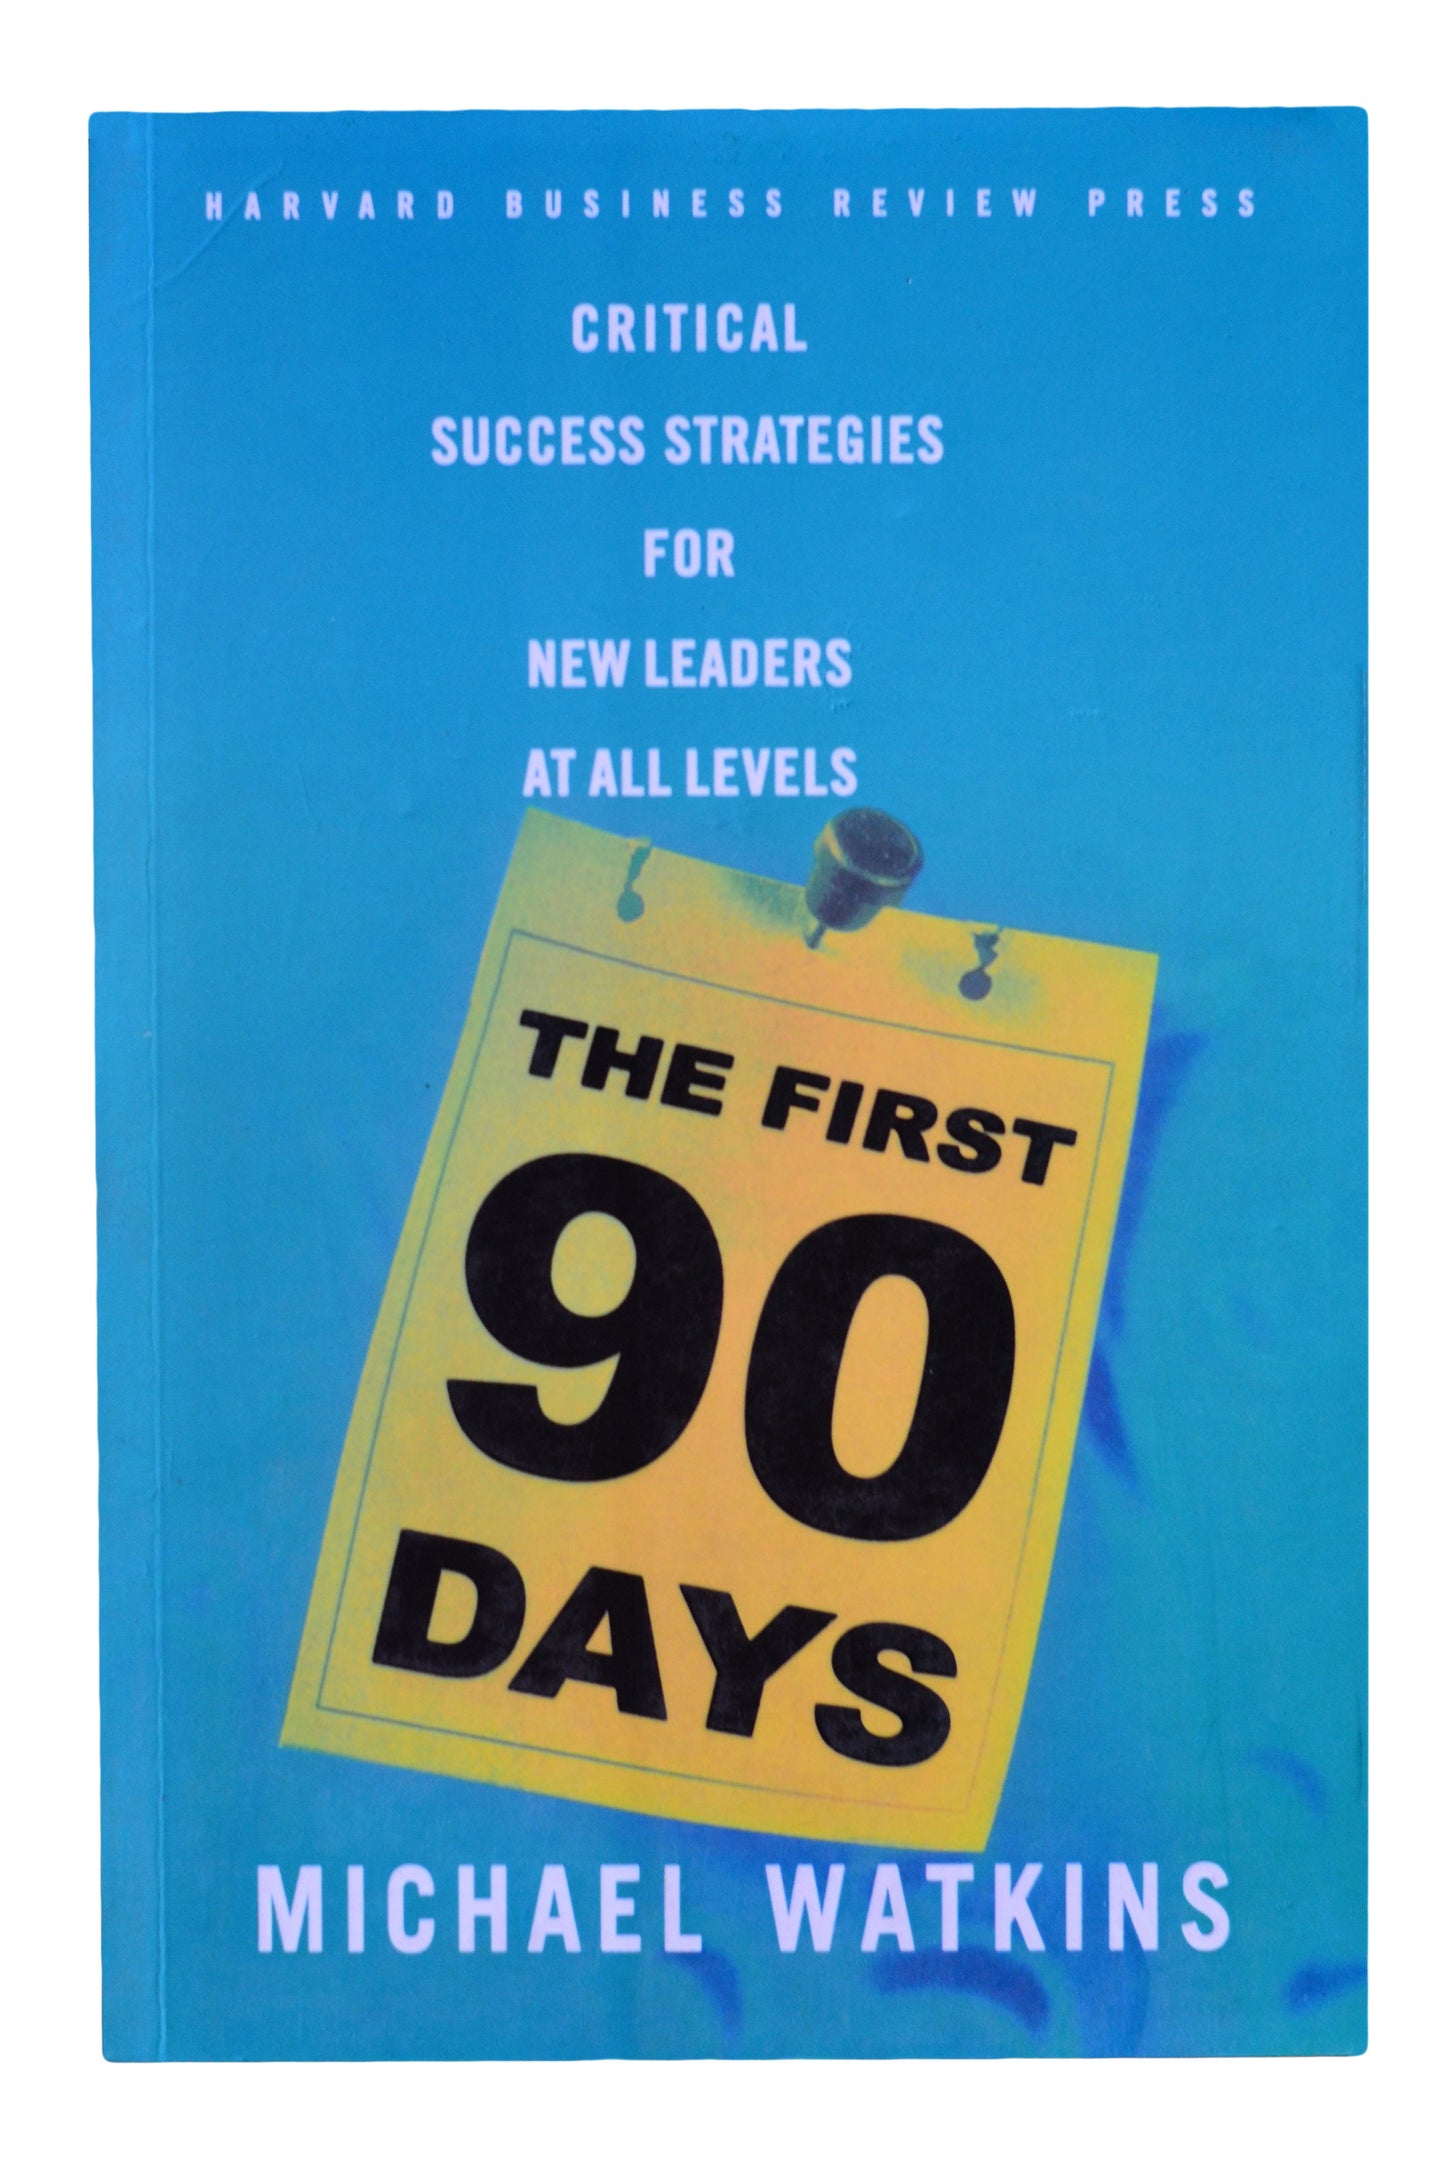 THE FIRST 90 DAYS